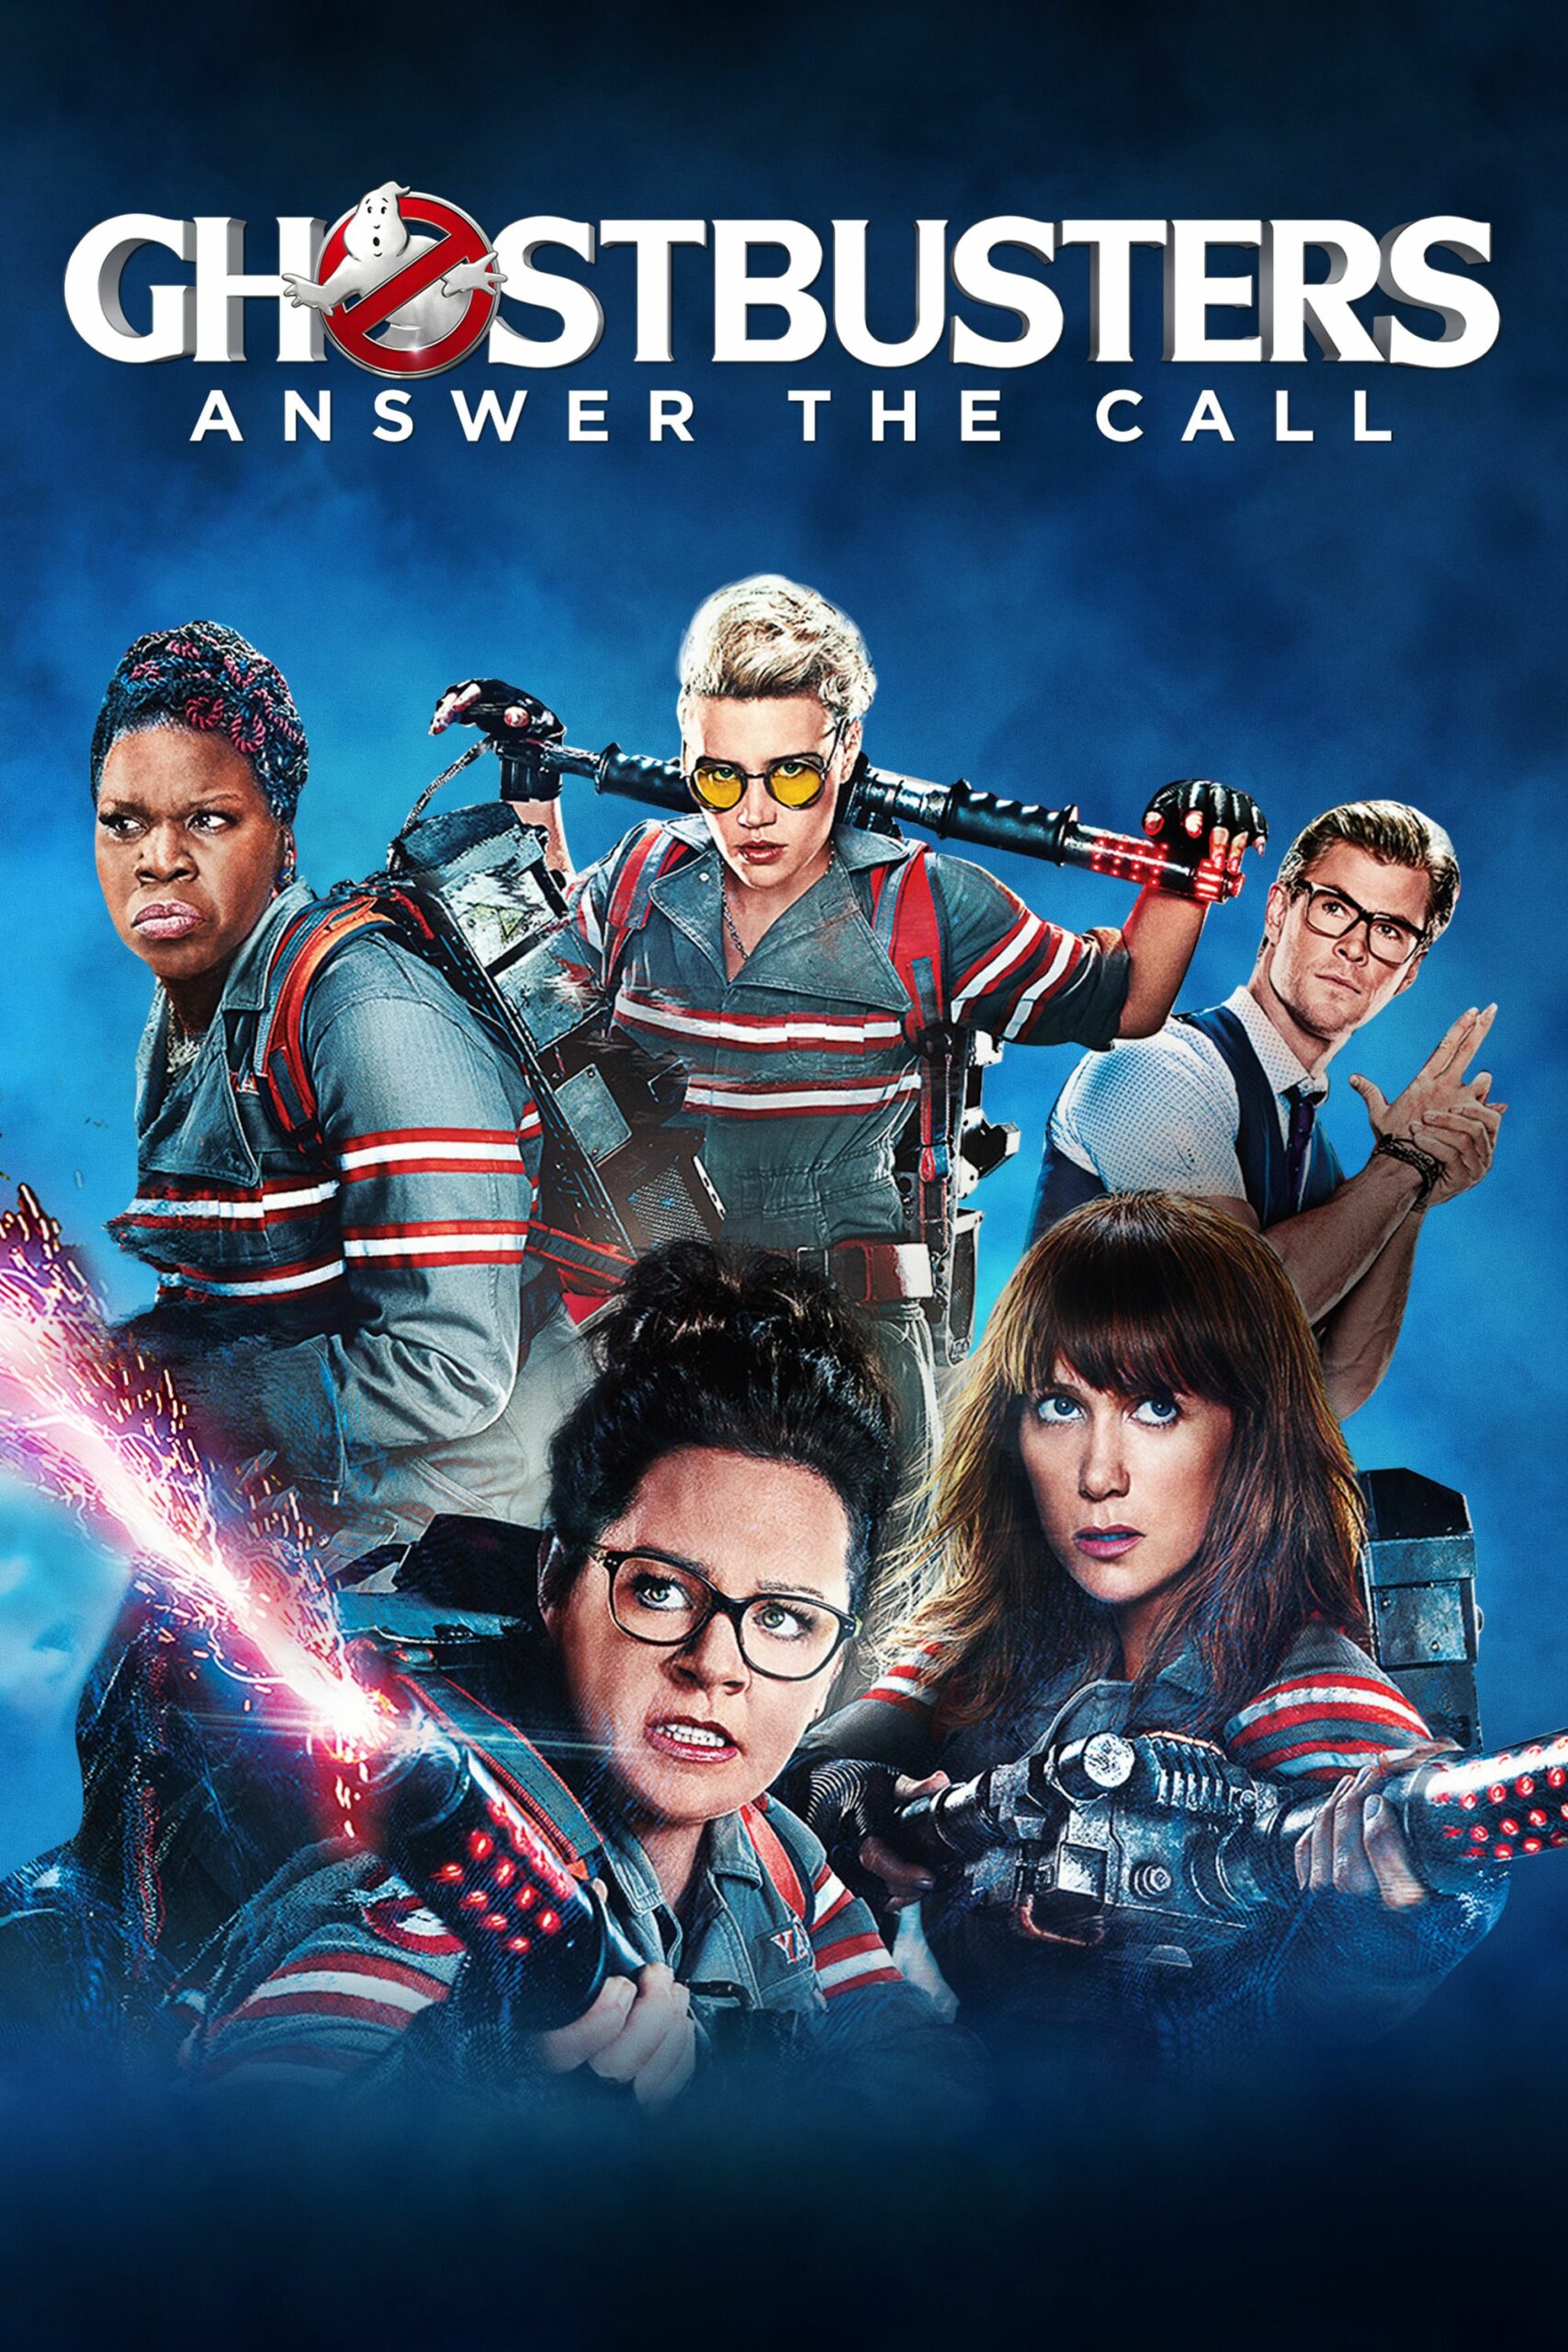 Ghostbusters: Answer the call